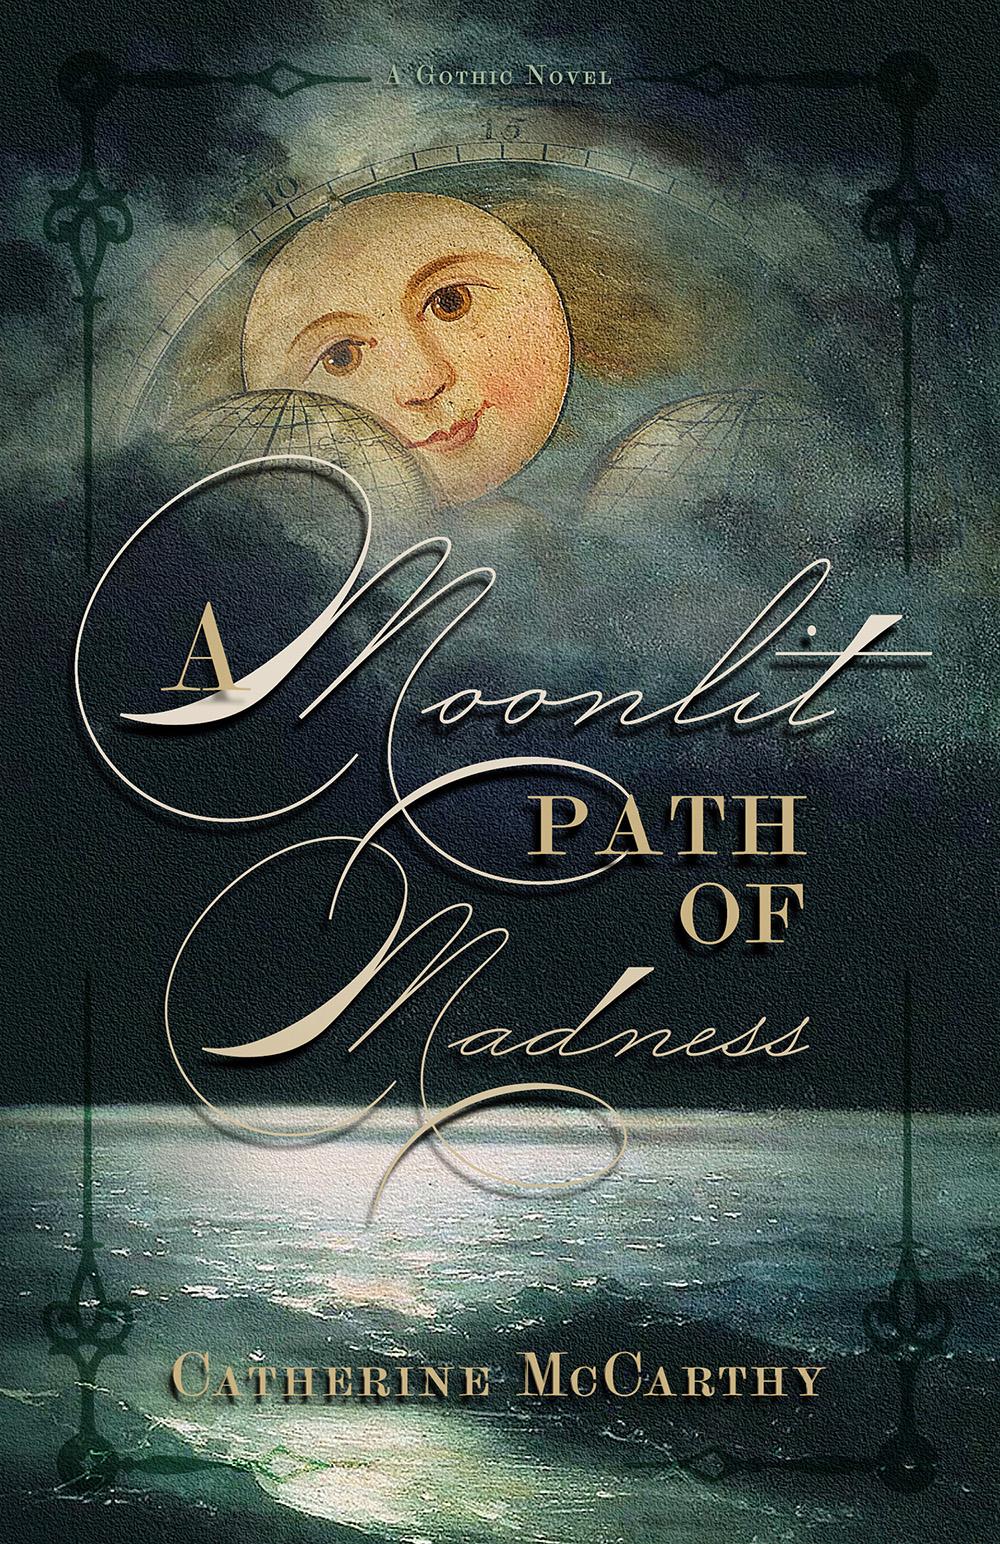 A Moonlit Path of Madness Catherine McCarthy